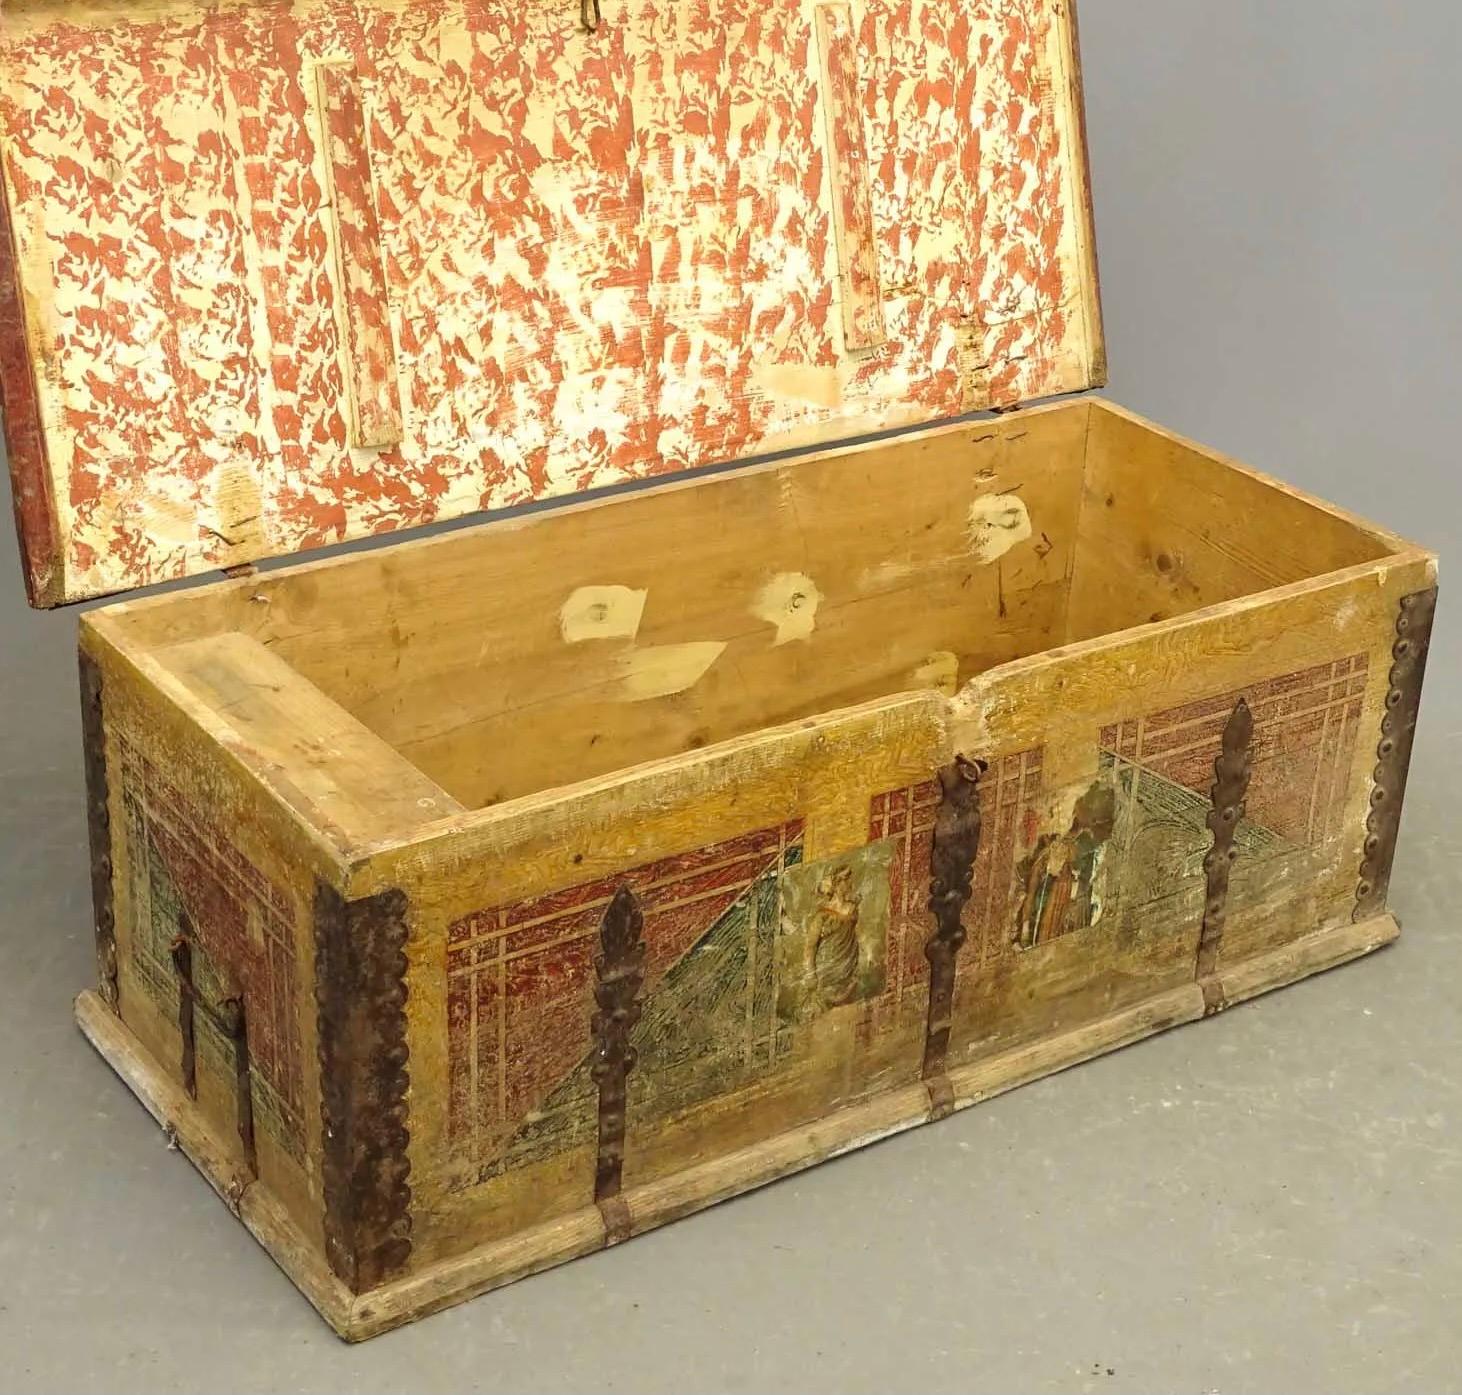 Hand-Crafted 19th Century European Hand Painted Blanket Chest For Sale